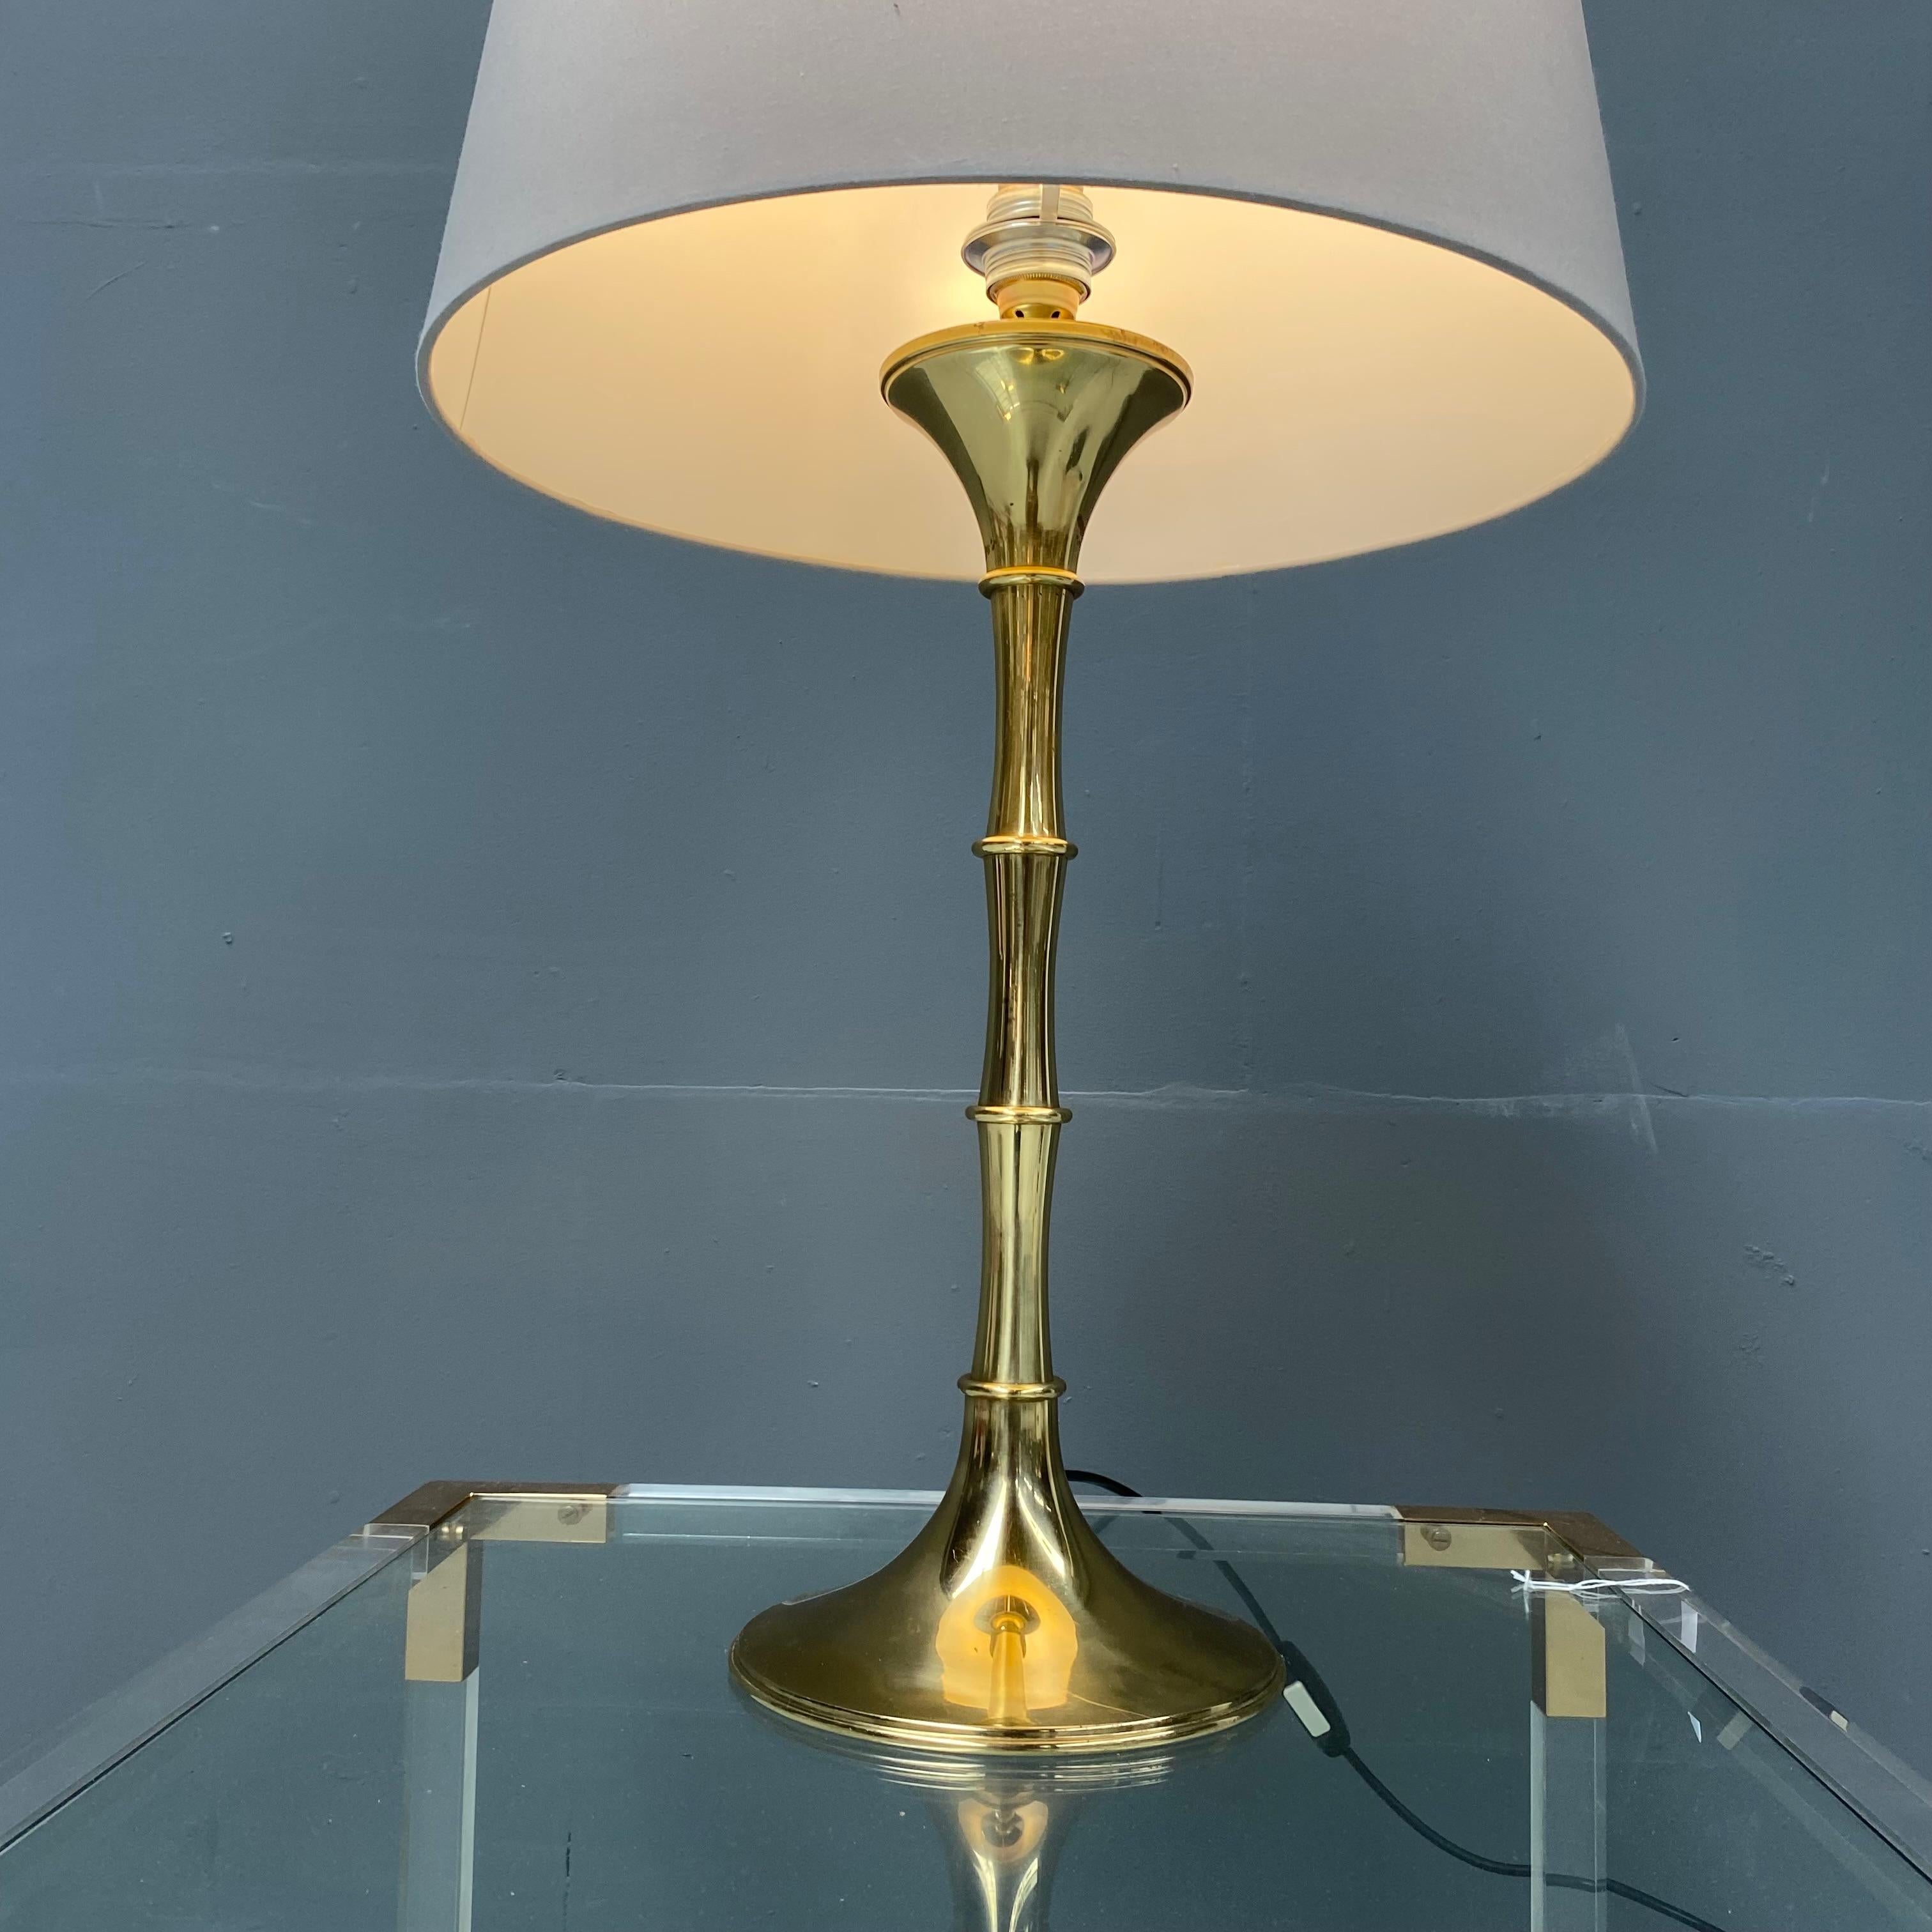 German Vintage Bamboo Table Lamp in Brass by Ingo Maurer for M Design, 1960s. For Sale